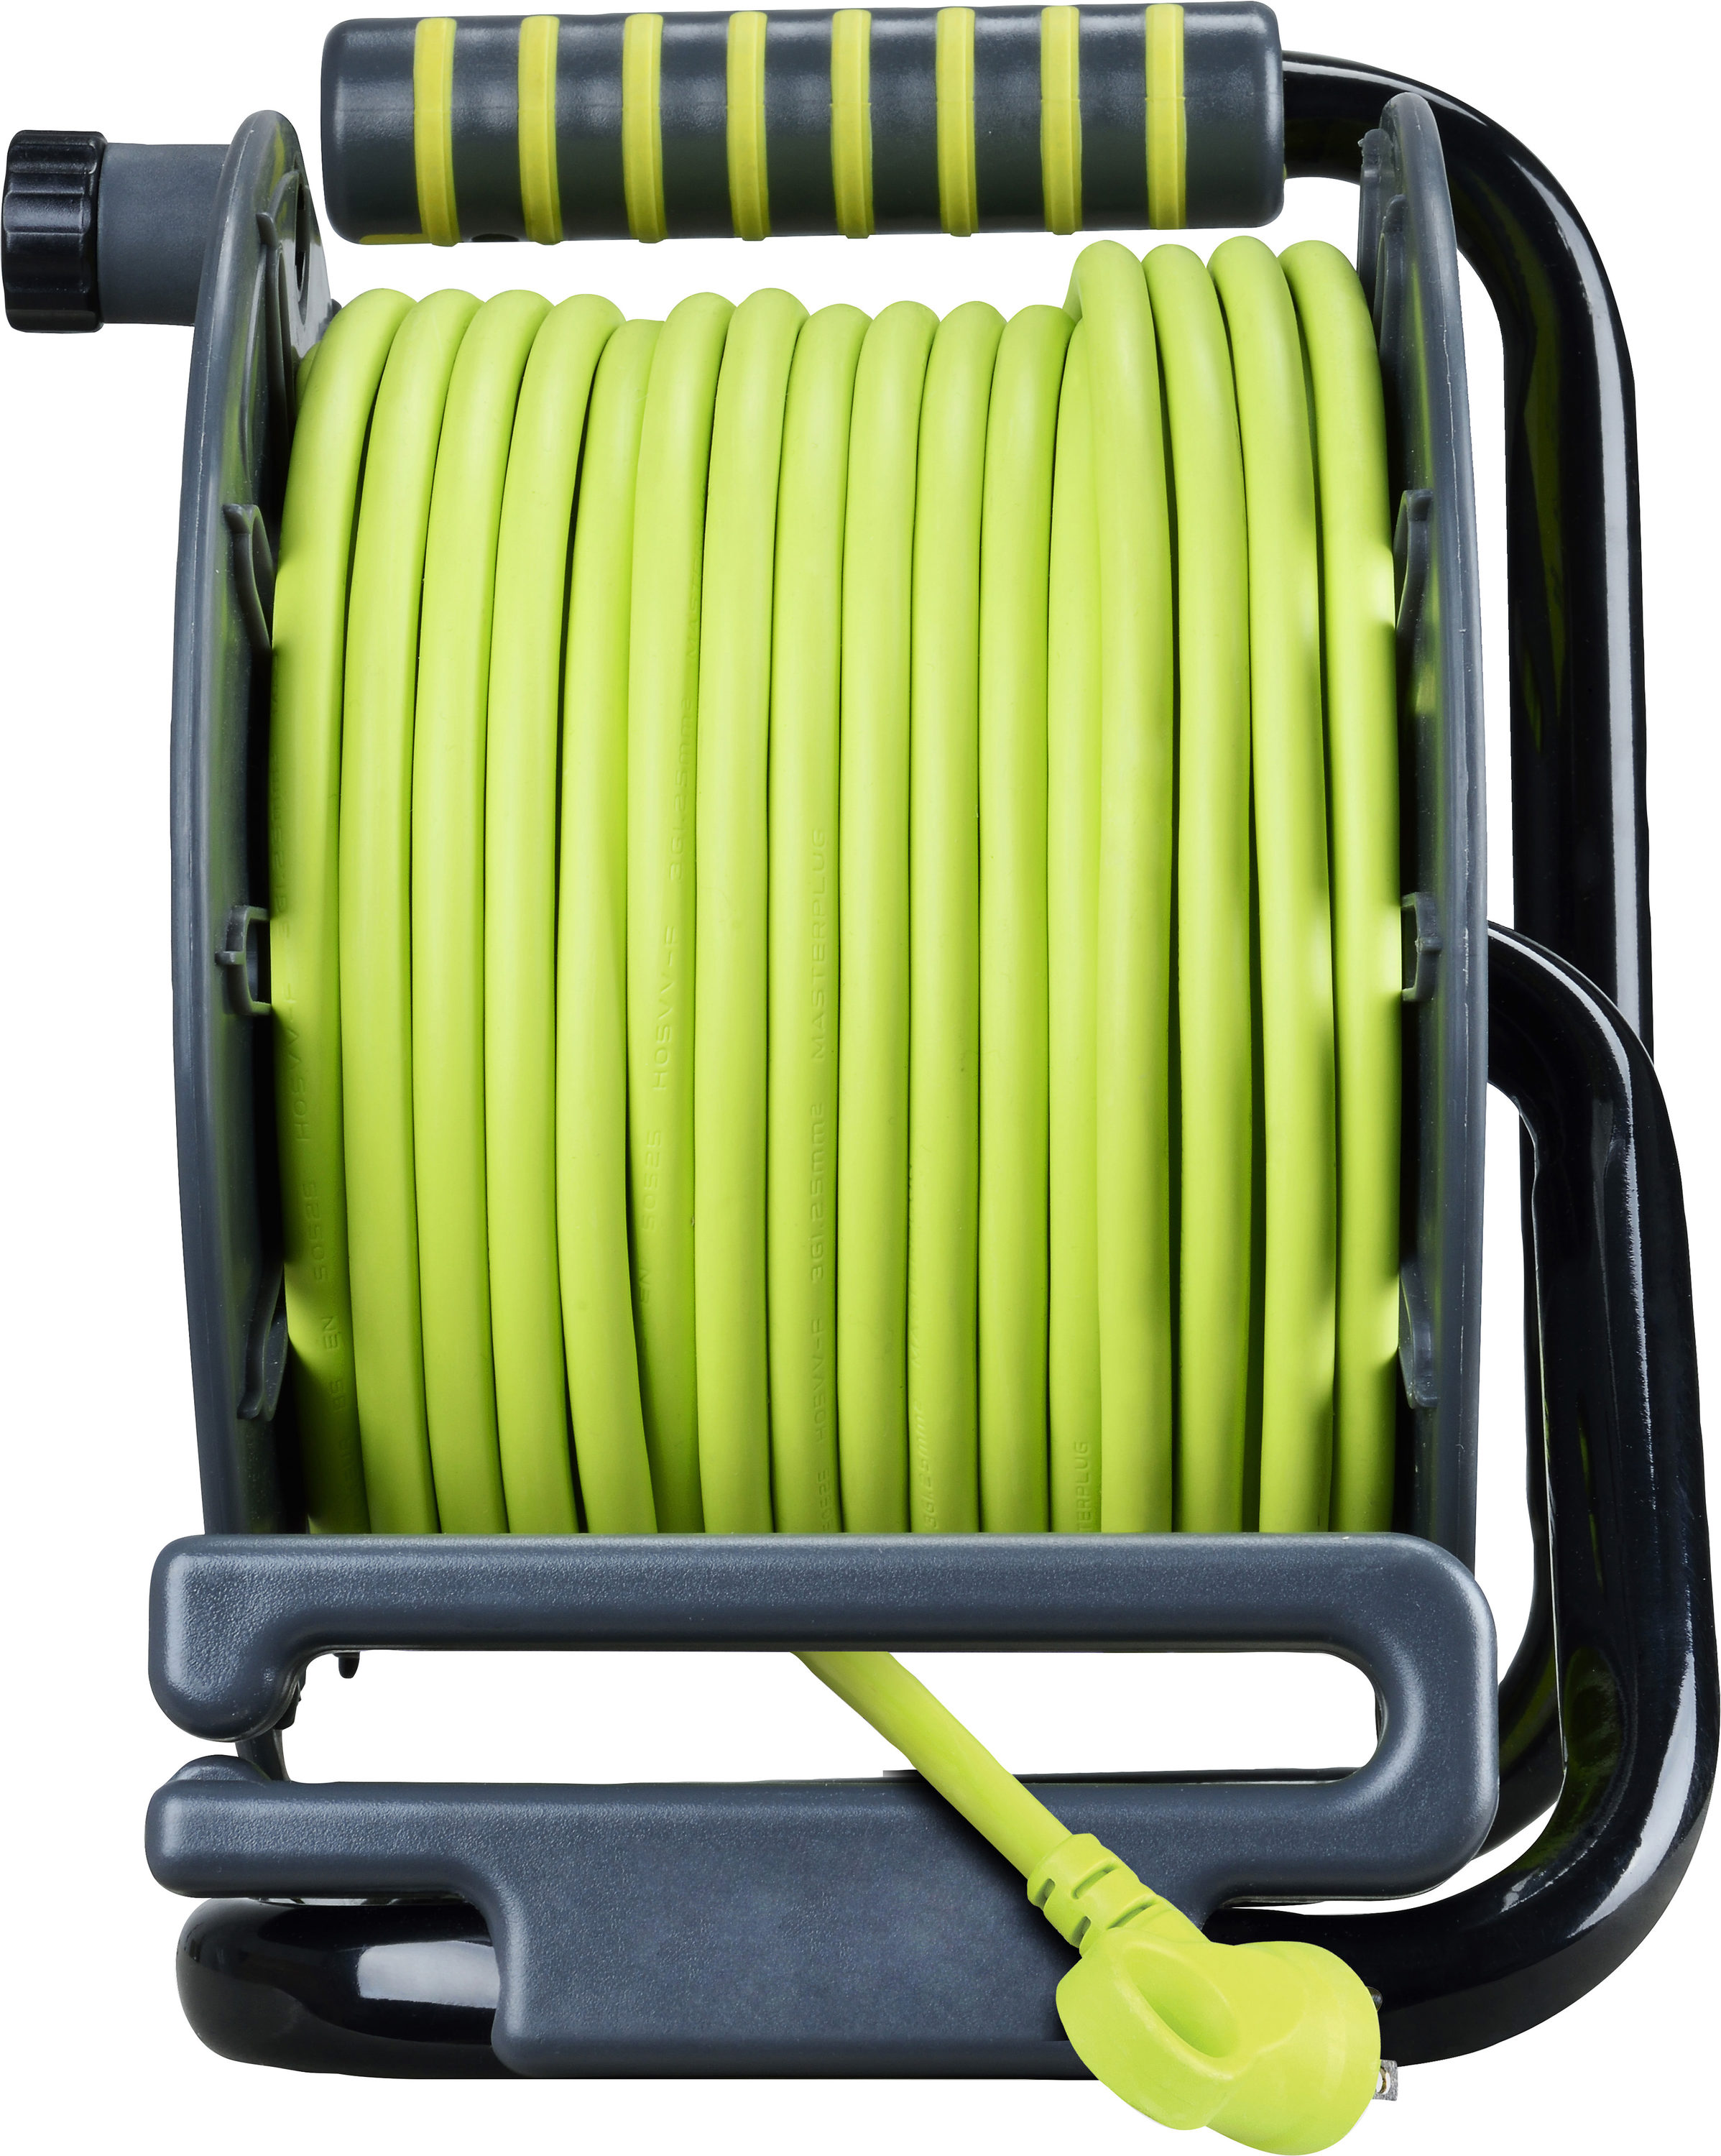 Cable/Cord/Hose Reels, Wire/Cable/Hose Management